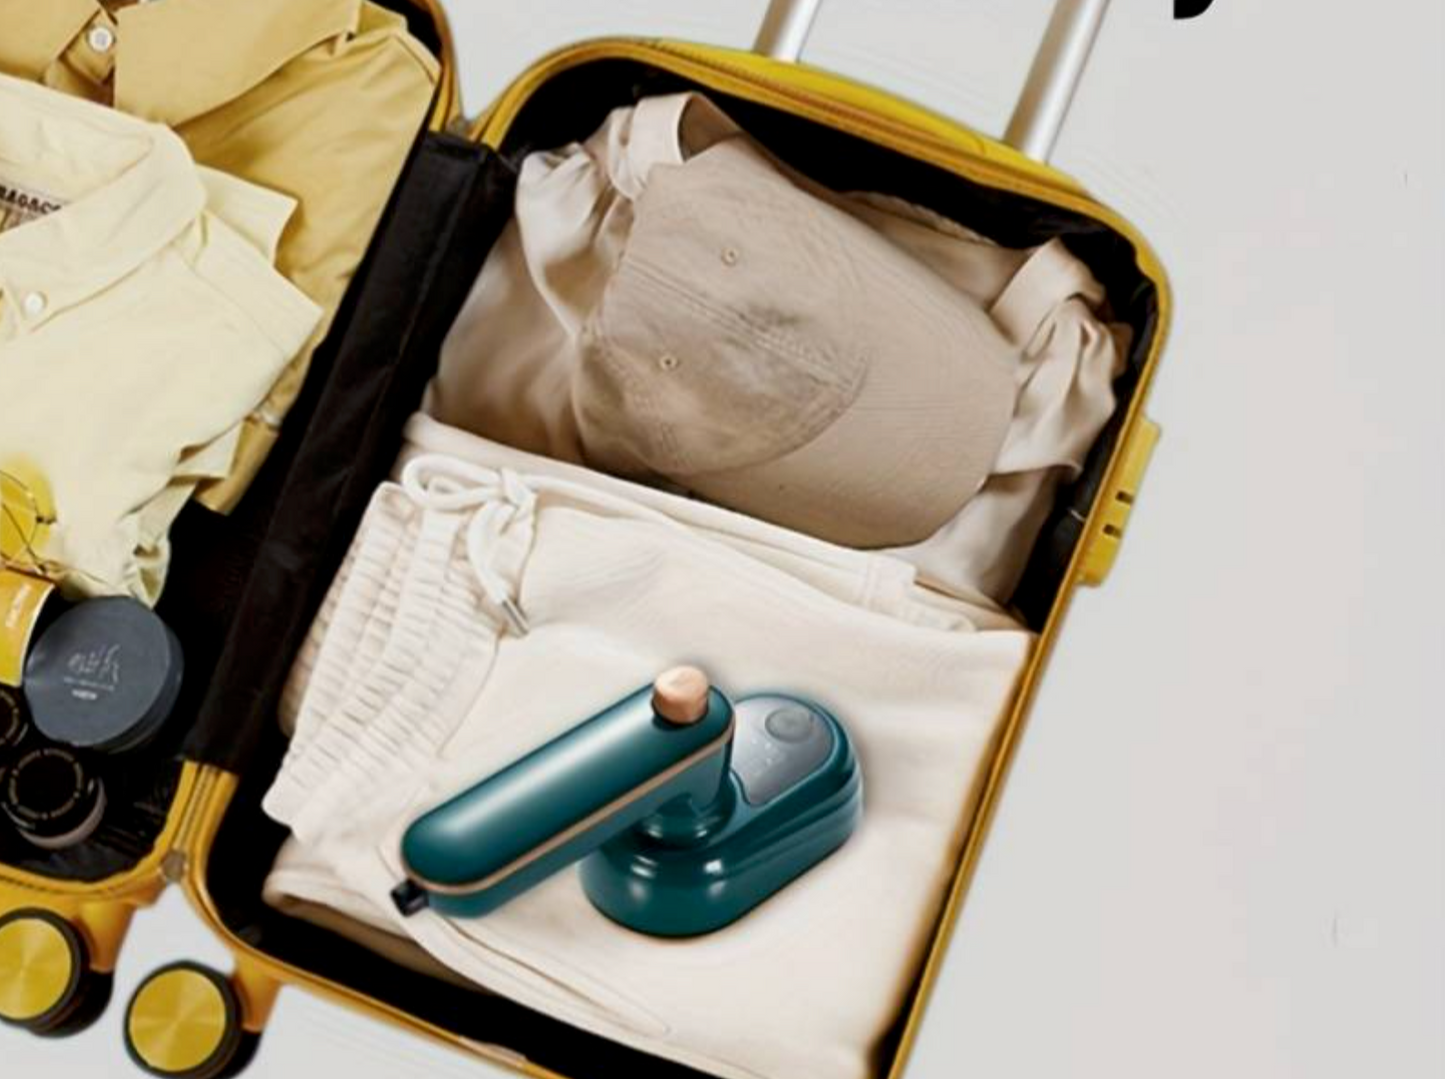 Foldable Travel Garment Steamer and professional Steam Iron